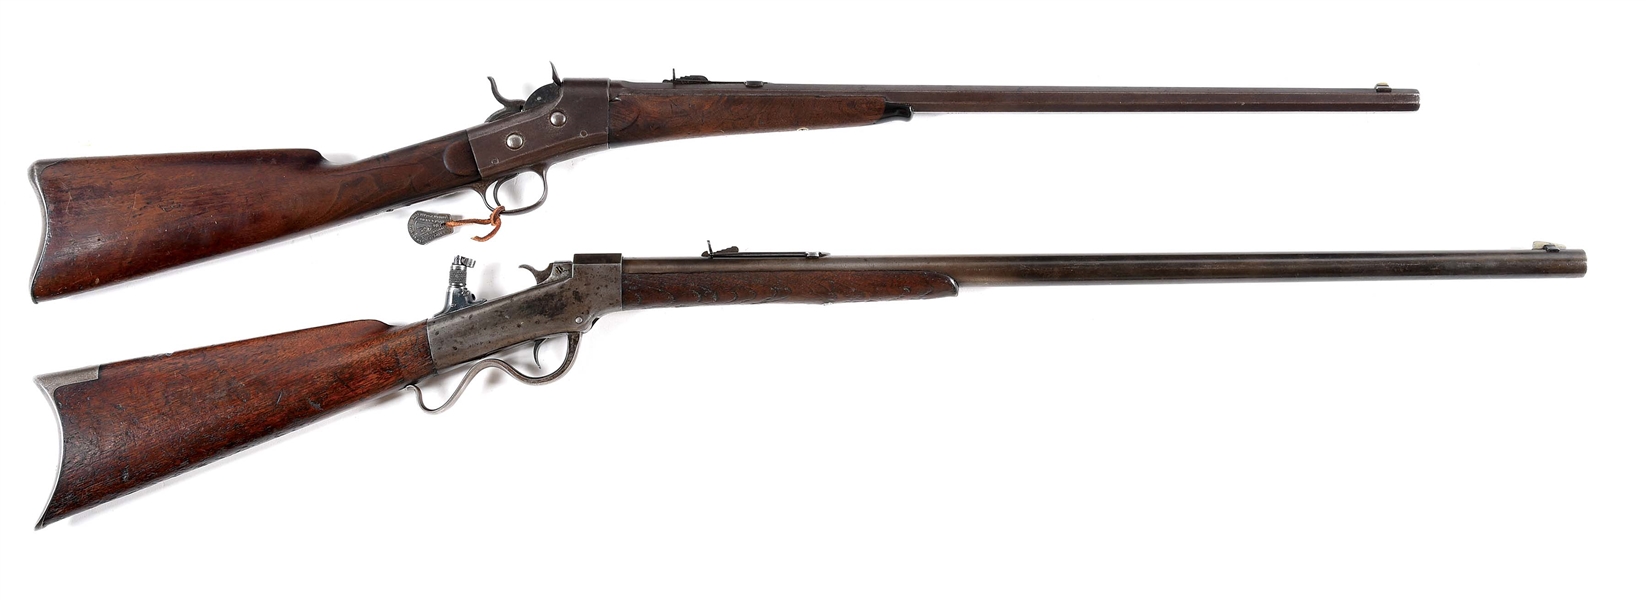 (A) INDIAN AFFAIRS IDENTIFIED WHITNEY NO 2 SPORTING RIFLE AND JM MARLIN SINGLE SHOT RIFLES.